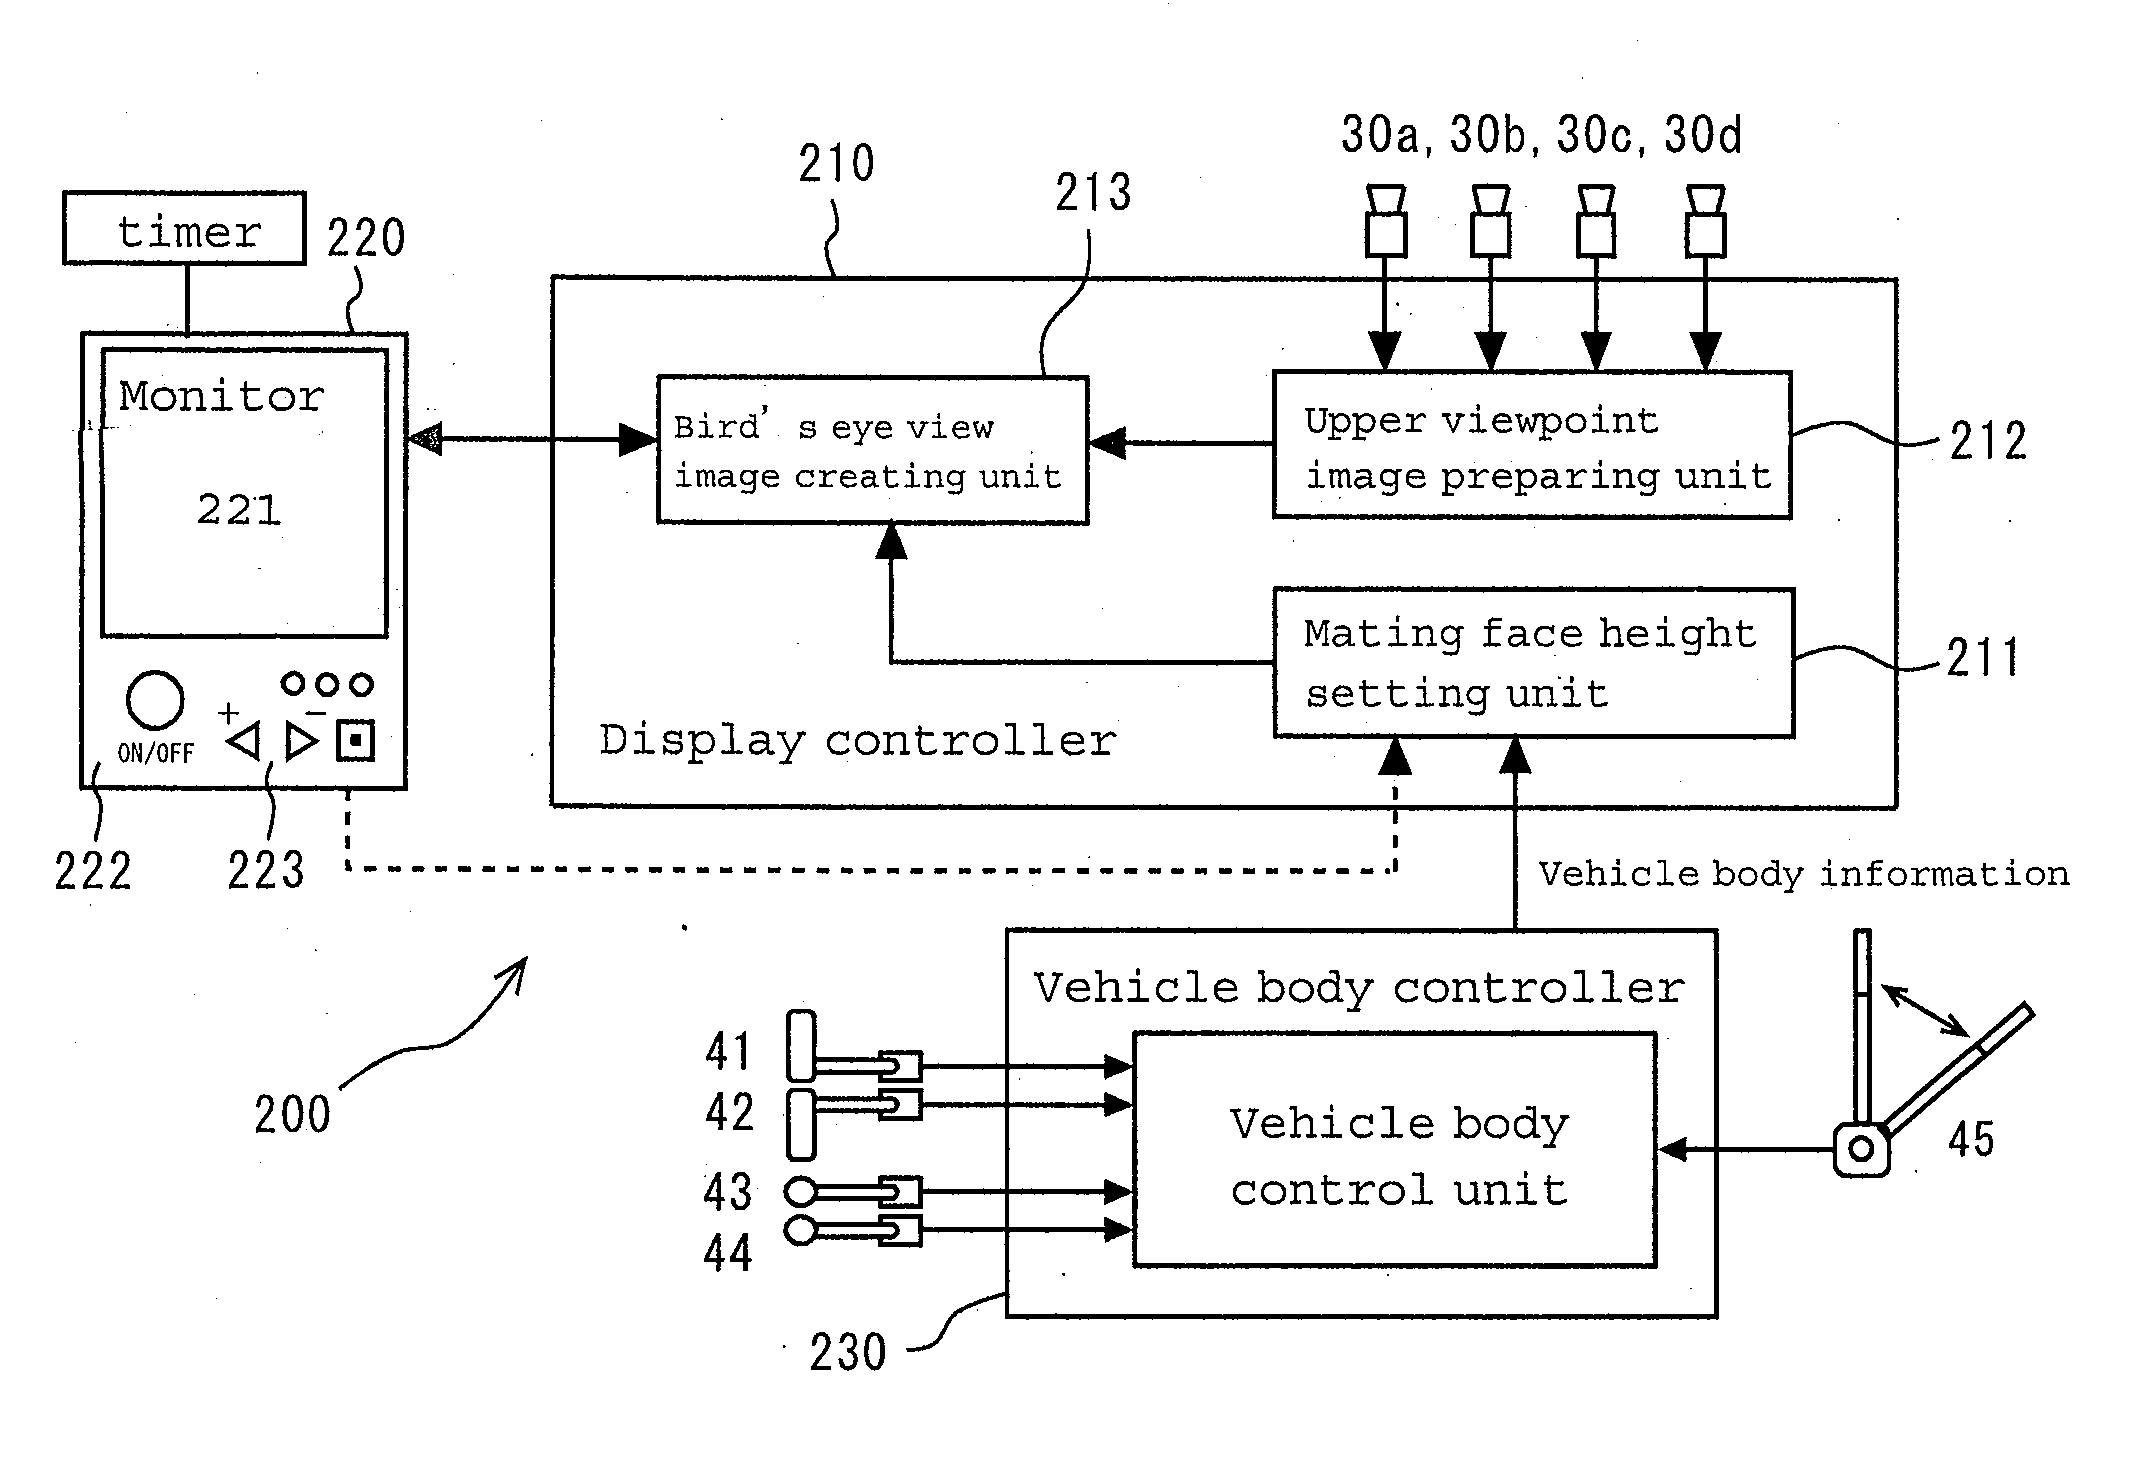 Environment monitoring device for operating machinery